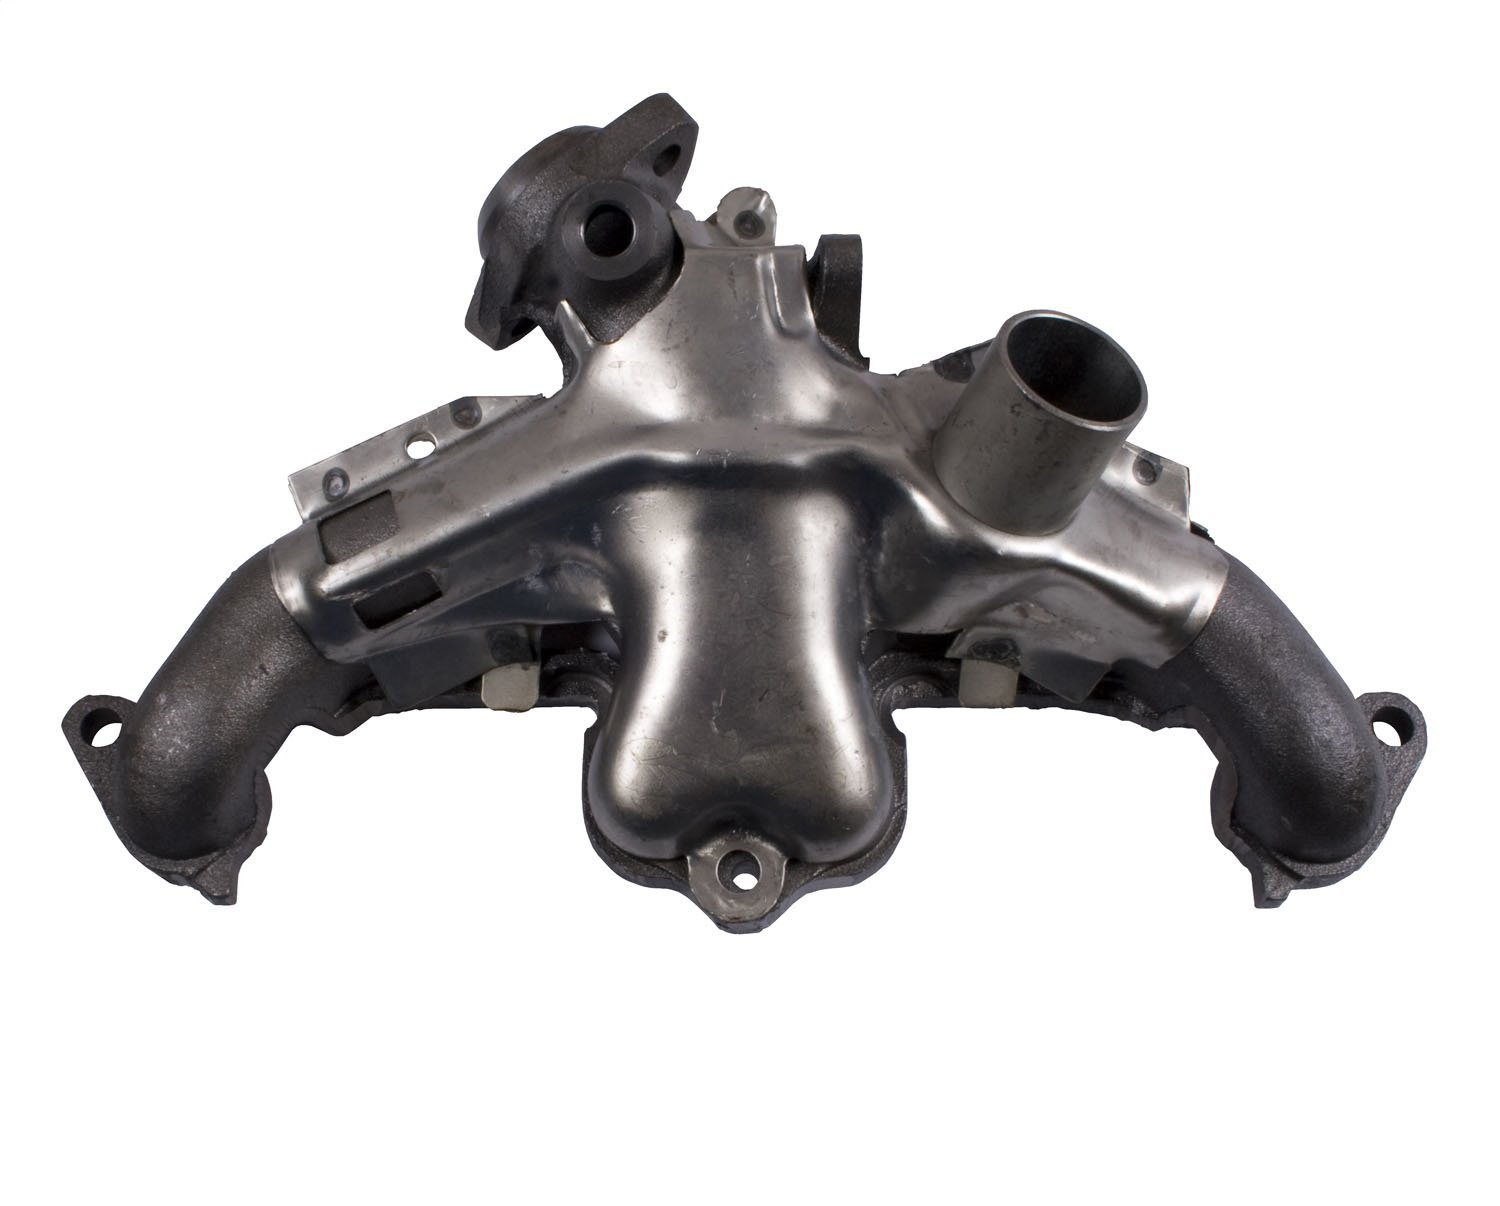 This exhaust manifold from Omix-ADA fits 91-00 Jeep Cherokees and 91-02 Wrangler with the 2.5 liter engine.